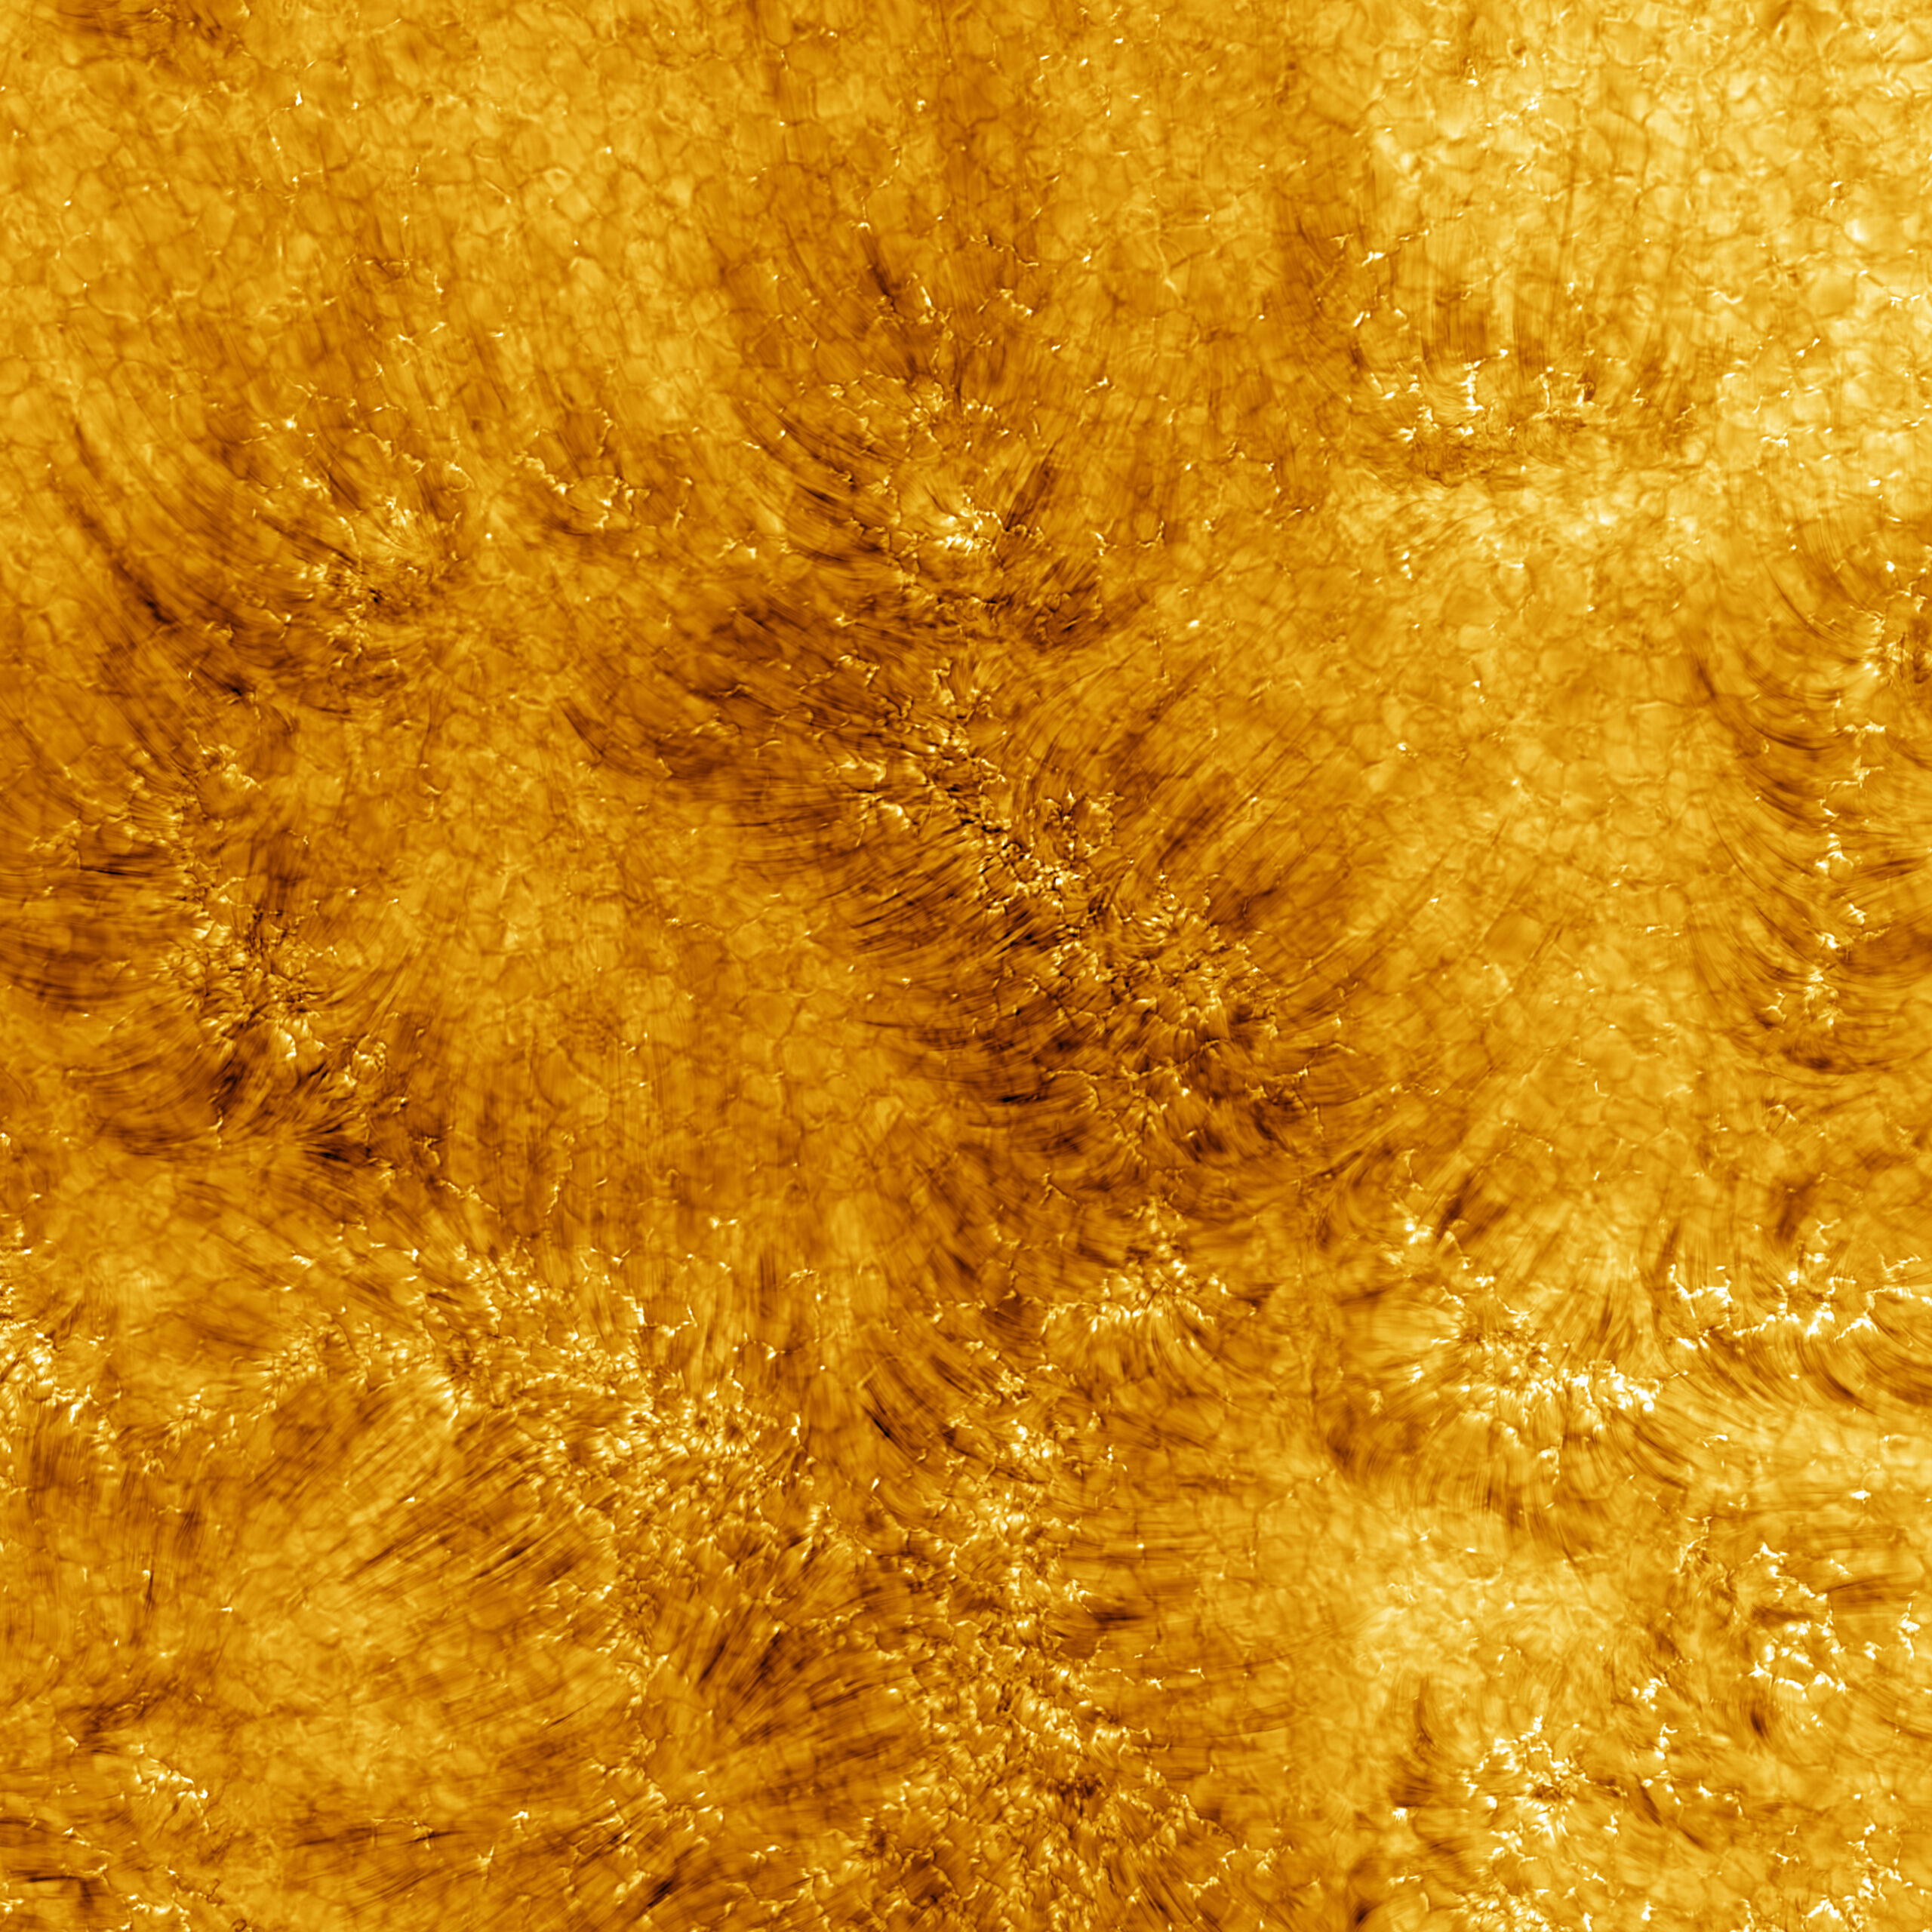 Turn up the heat with these fiery, stunningly-detailed images of our sun